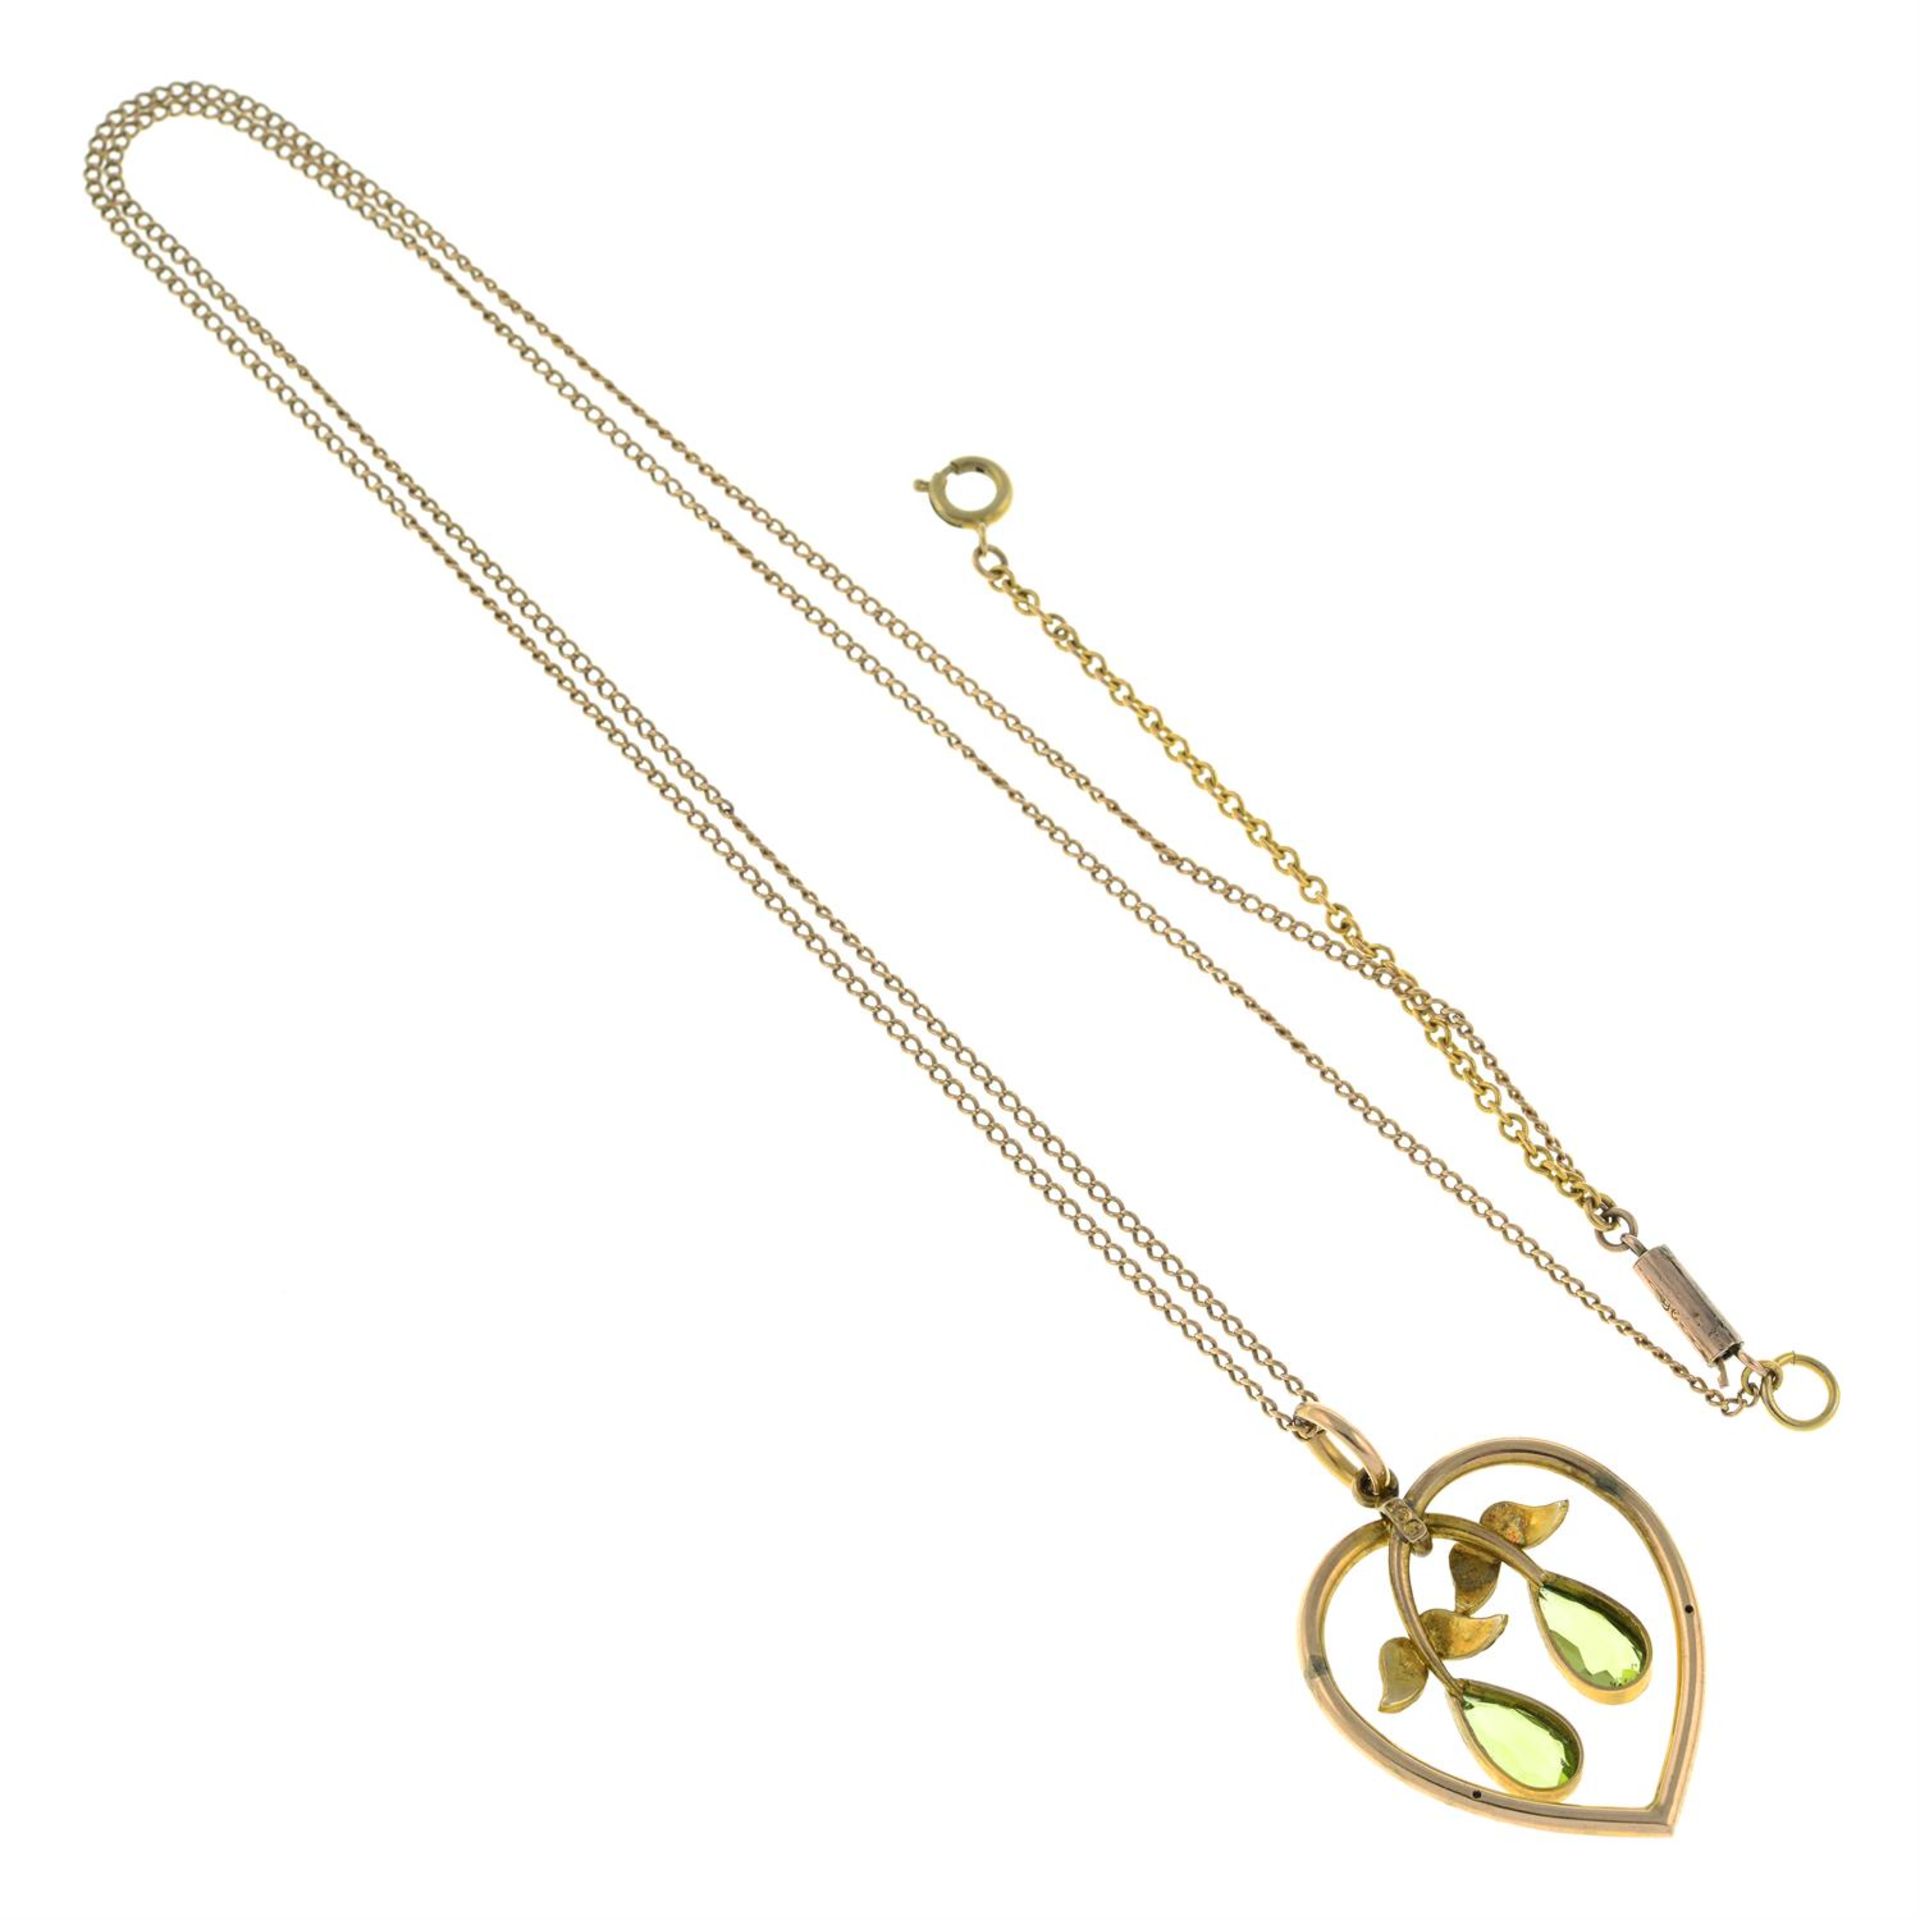 An Edwardian 9ct gold peridot and split pearl pendant, with 9ct gold chain. - Image 2 of 2